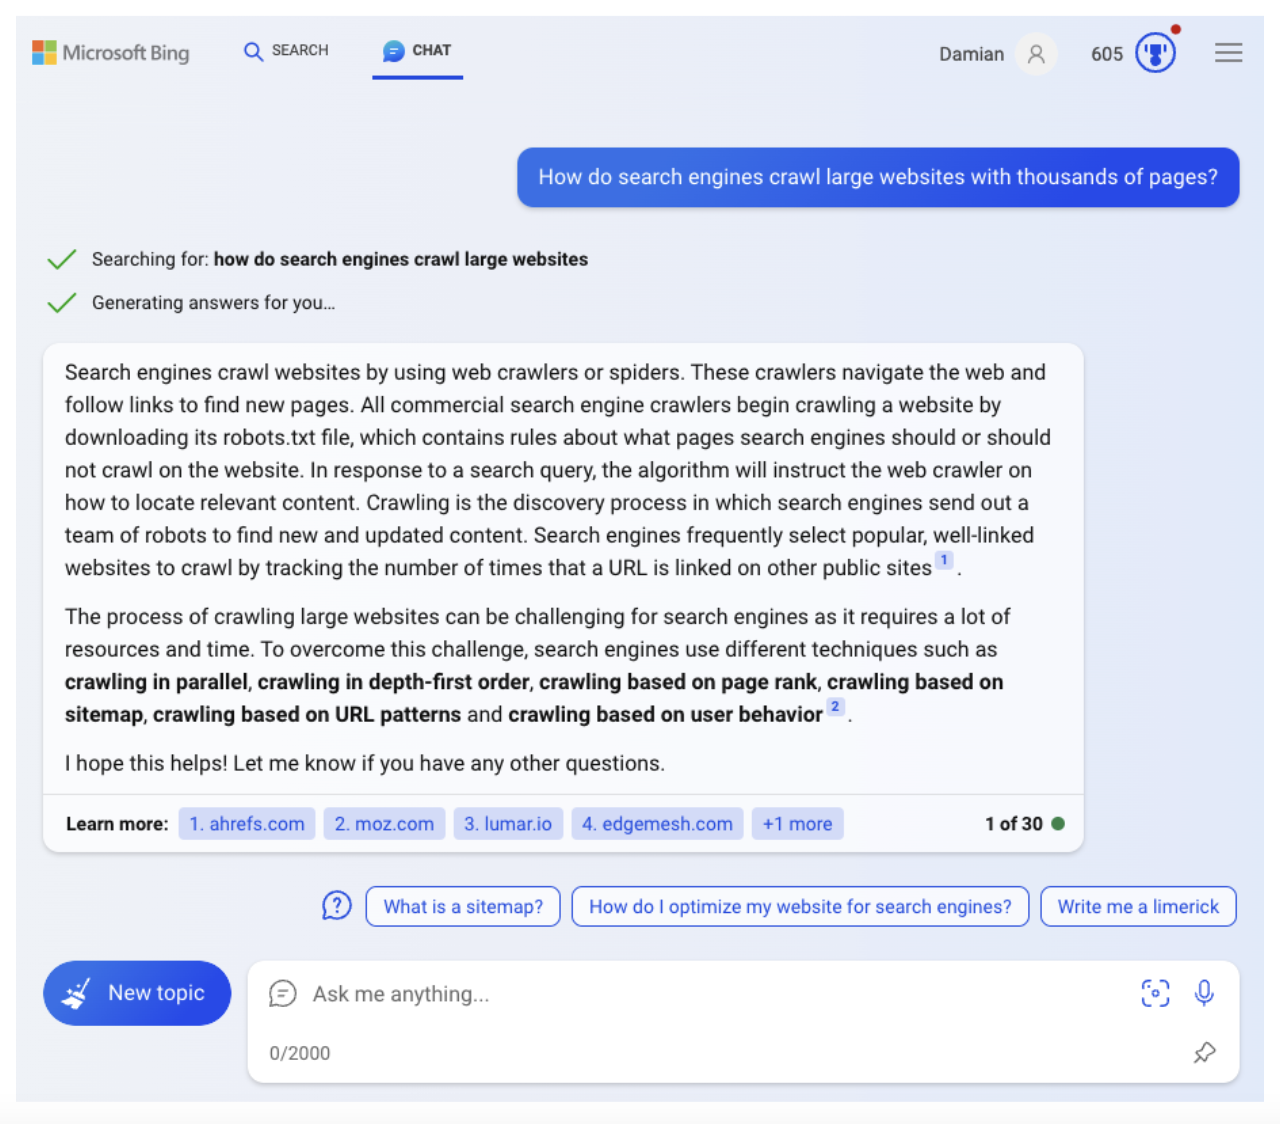 Bing chat offers concise responses to informational queries with footnotes and links to check sources, acting as a super-powered research assistant.